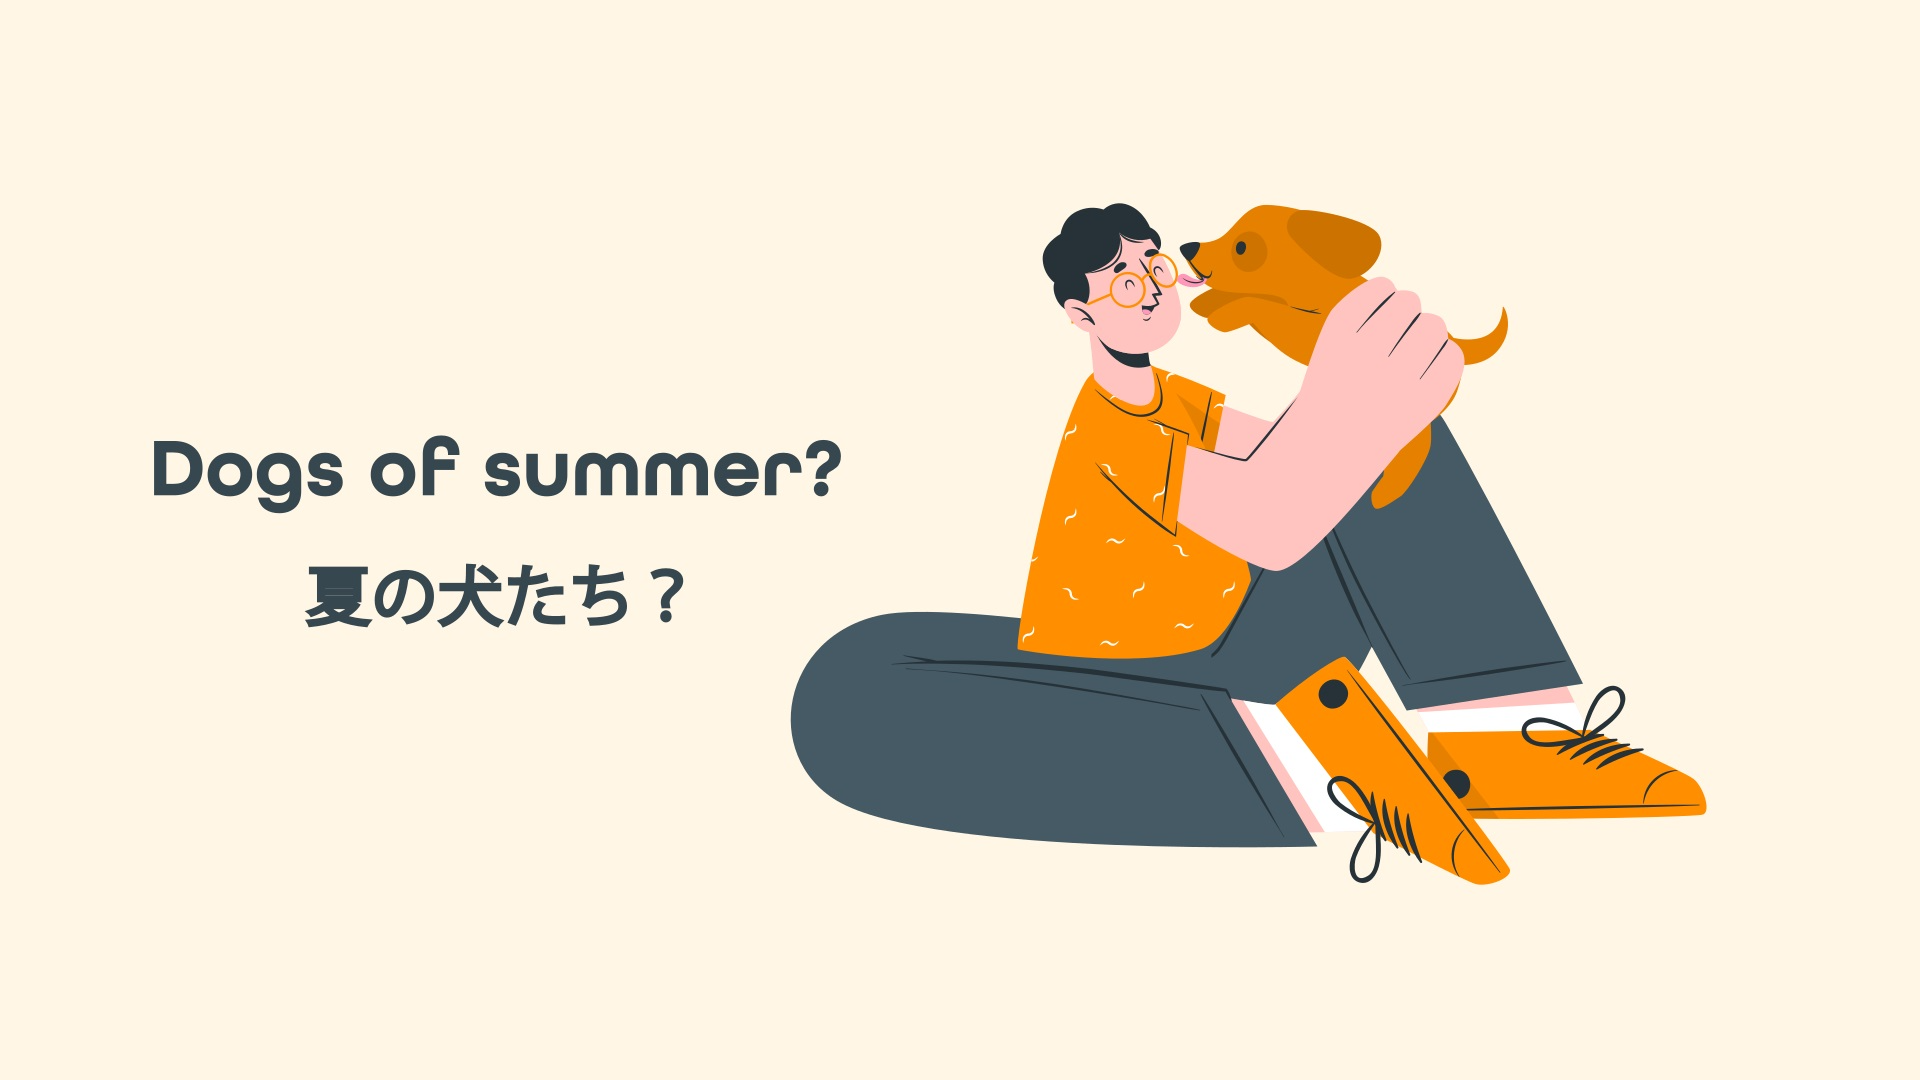 Featured image for “Dogs of summer? 夏の犬たち？”